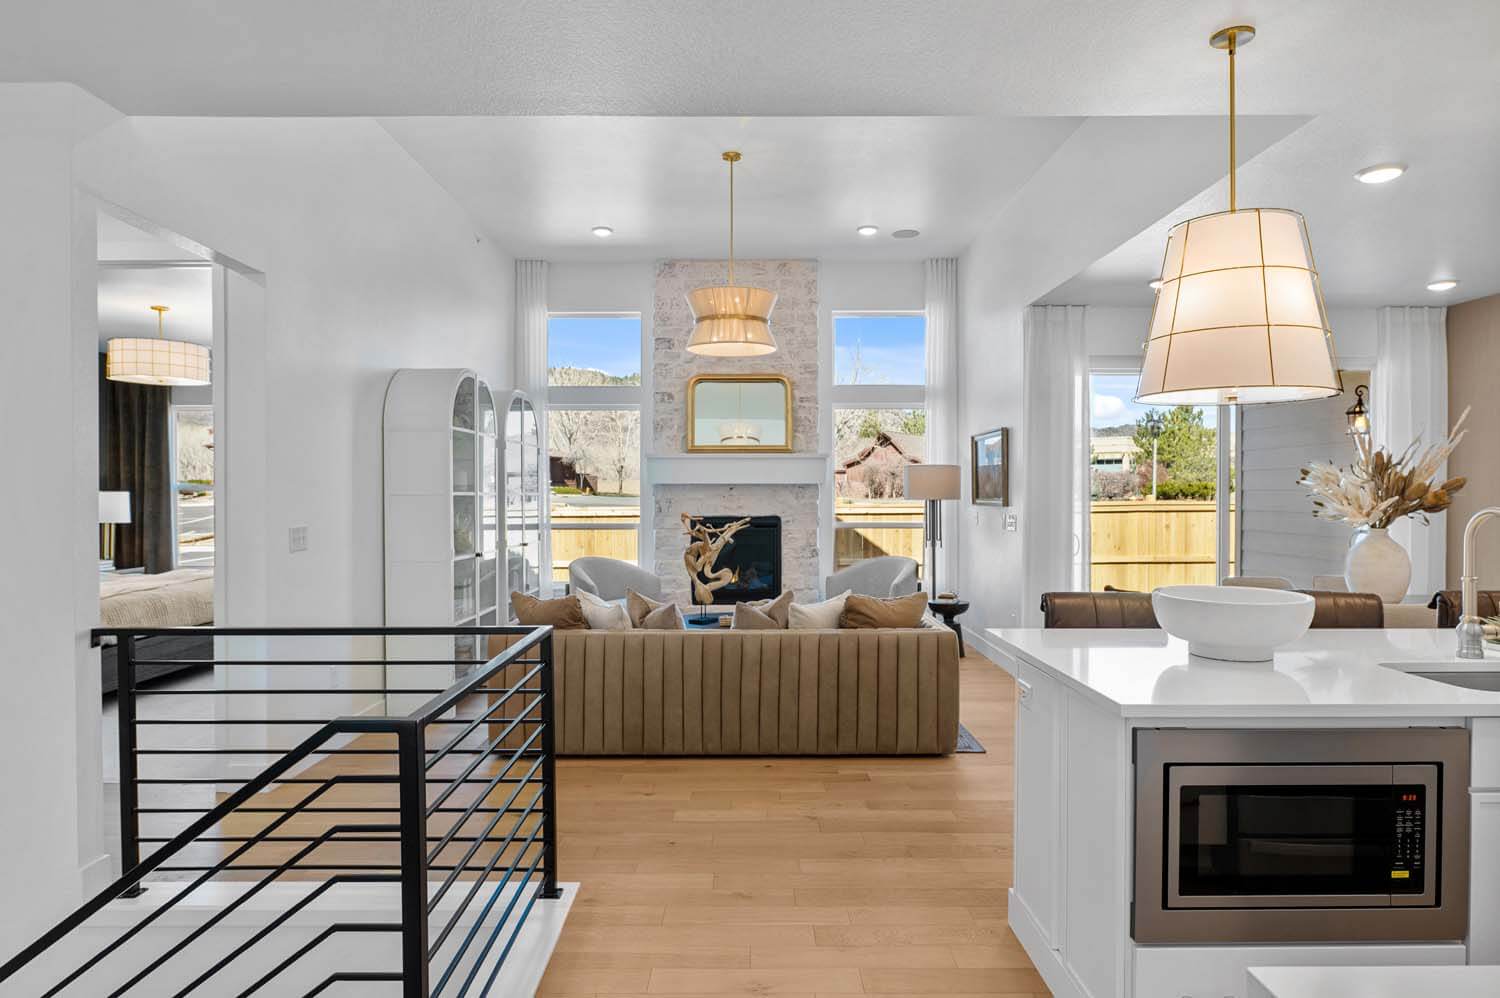 The open-concept floorplan has the kitchen next to the basement stairs and adjacent to the dining area and great room, which are at the back of the house. The door to the primary suite is off the great room. The space has hardwood floors, white walls and large windows.